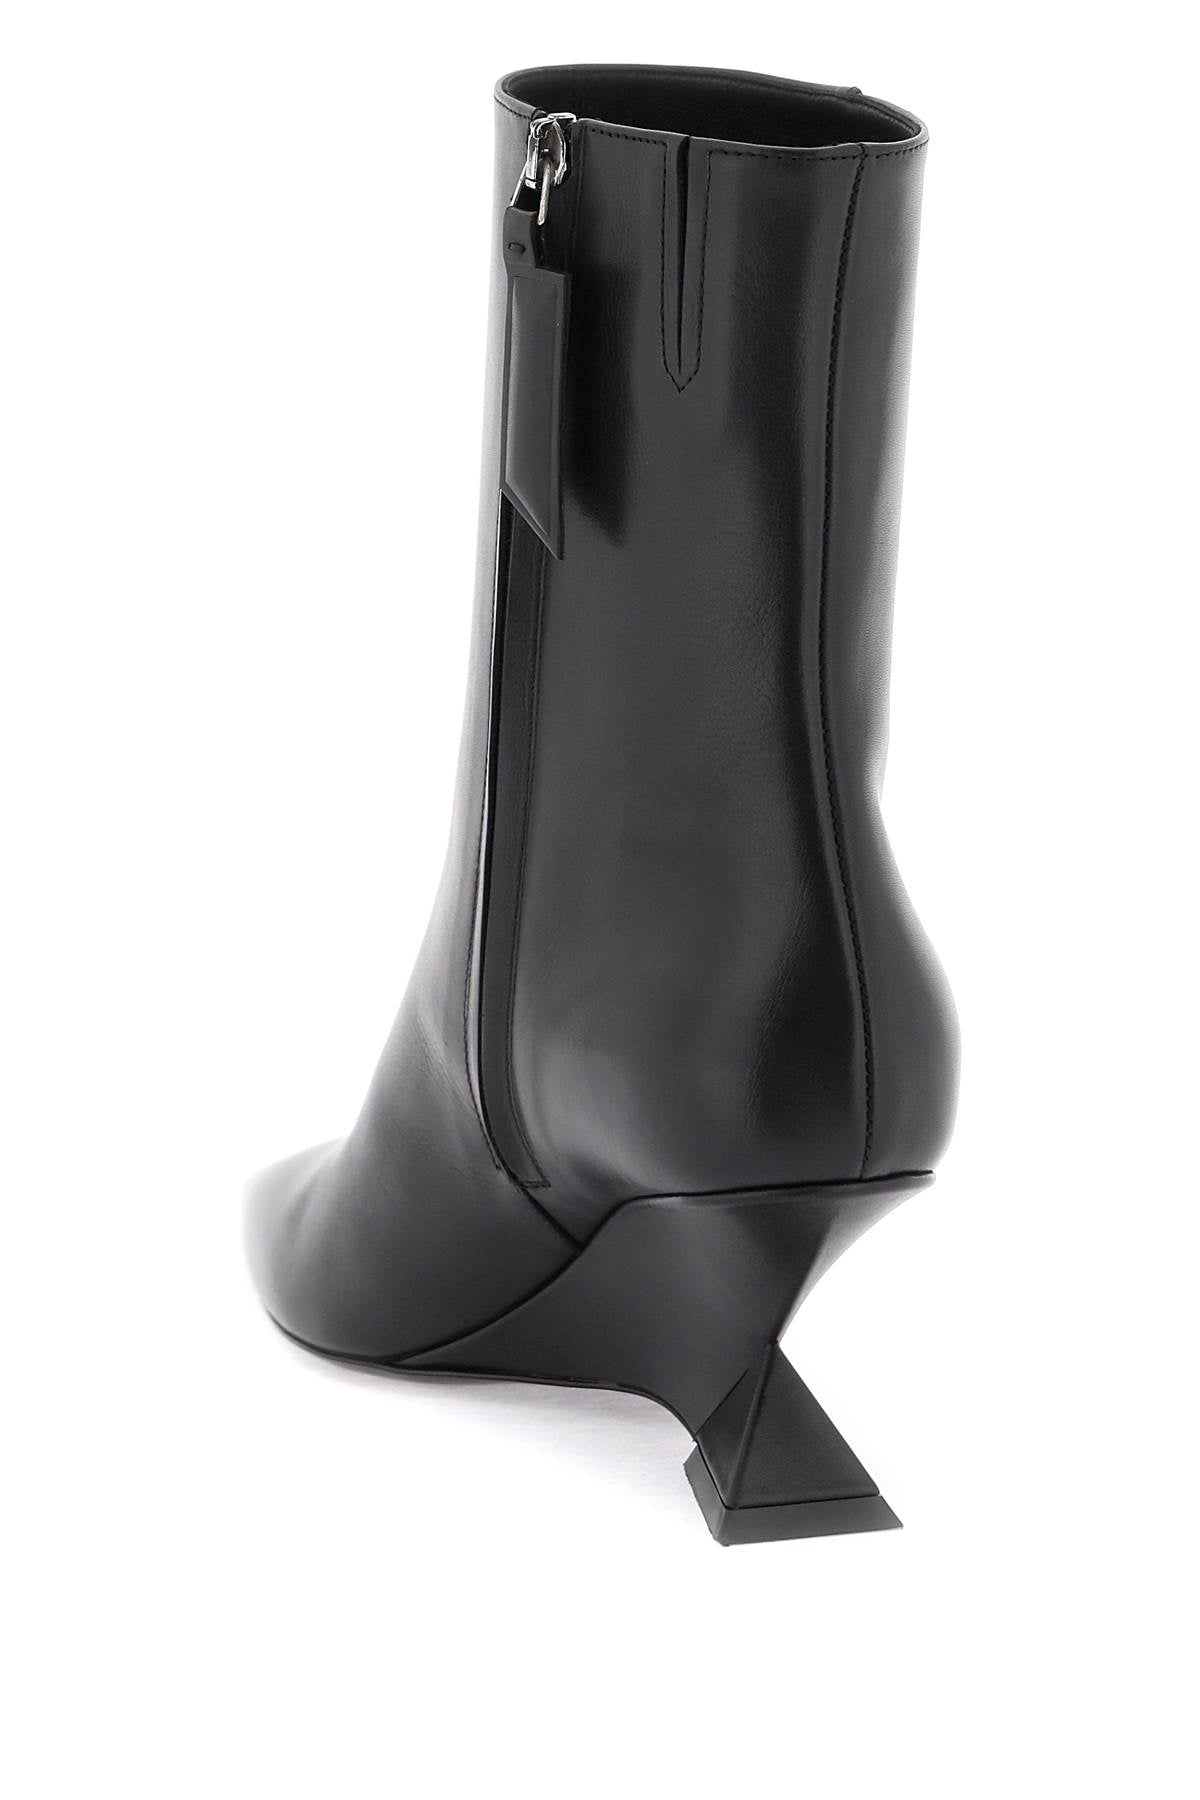 THE ATTICO Sleek and Sophisticated Black Ankle Boots for Women